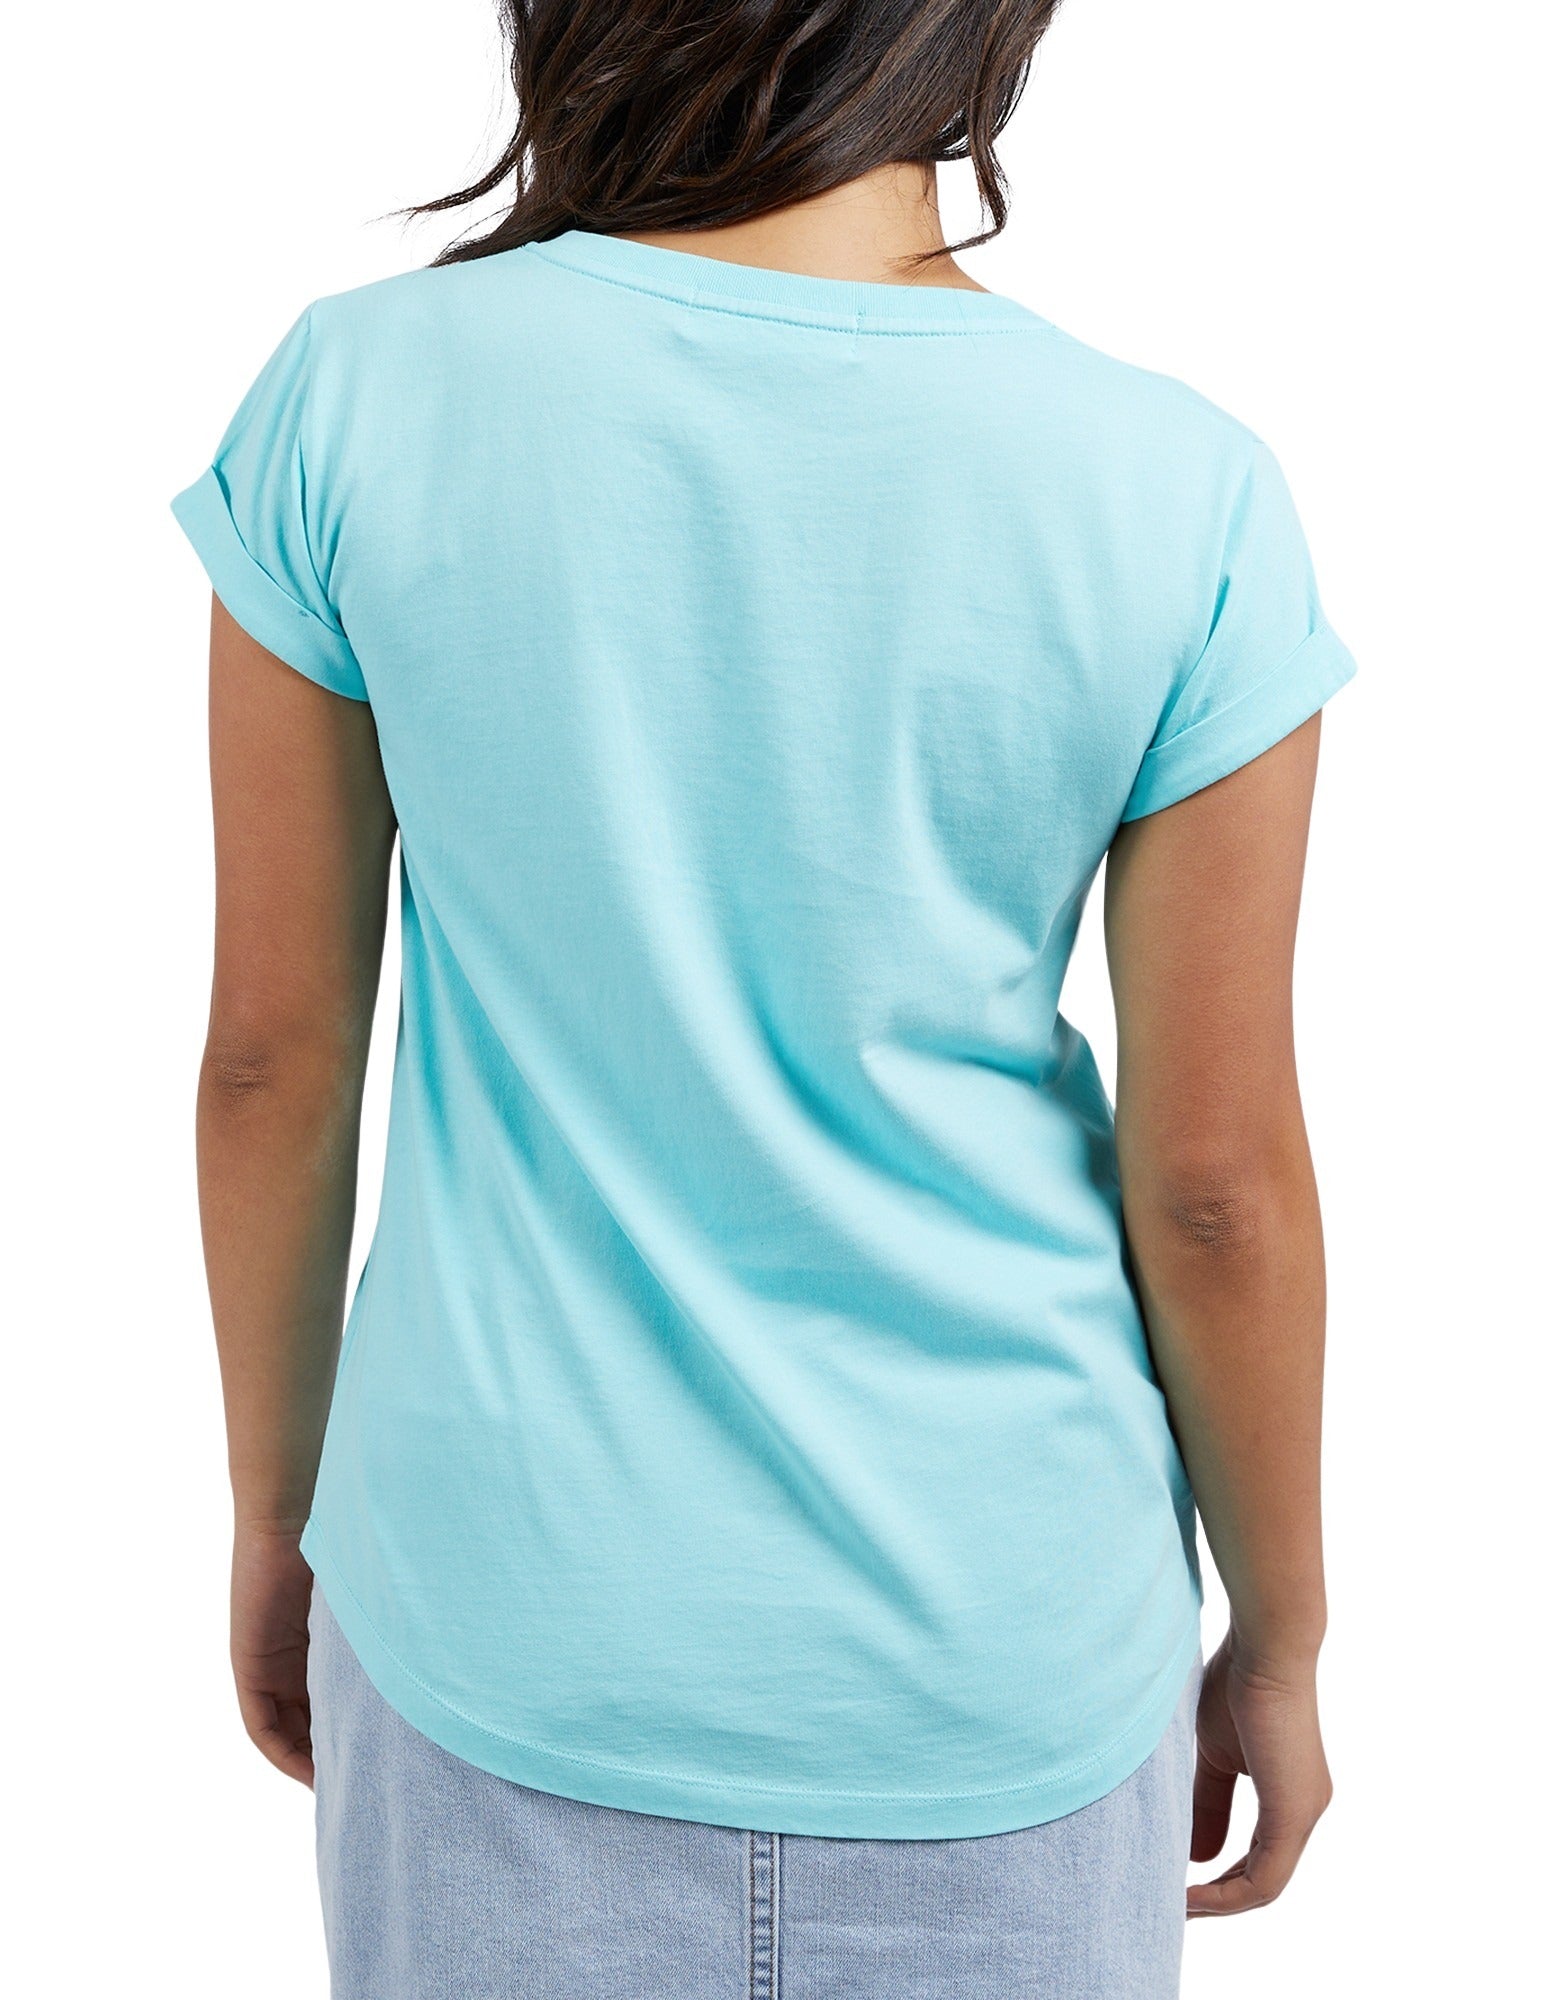 Foxwood Manly Vee Tee - Light Blue